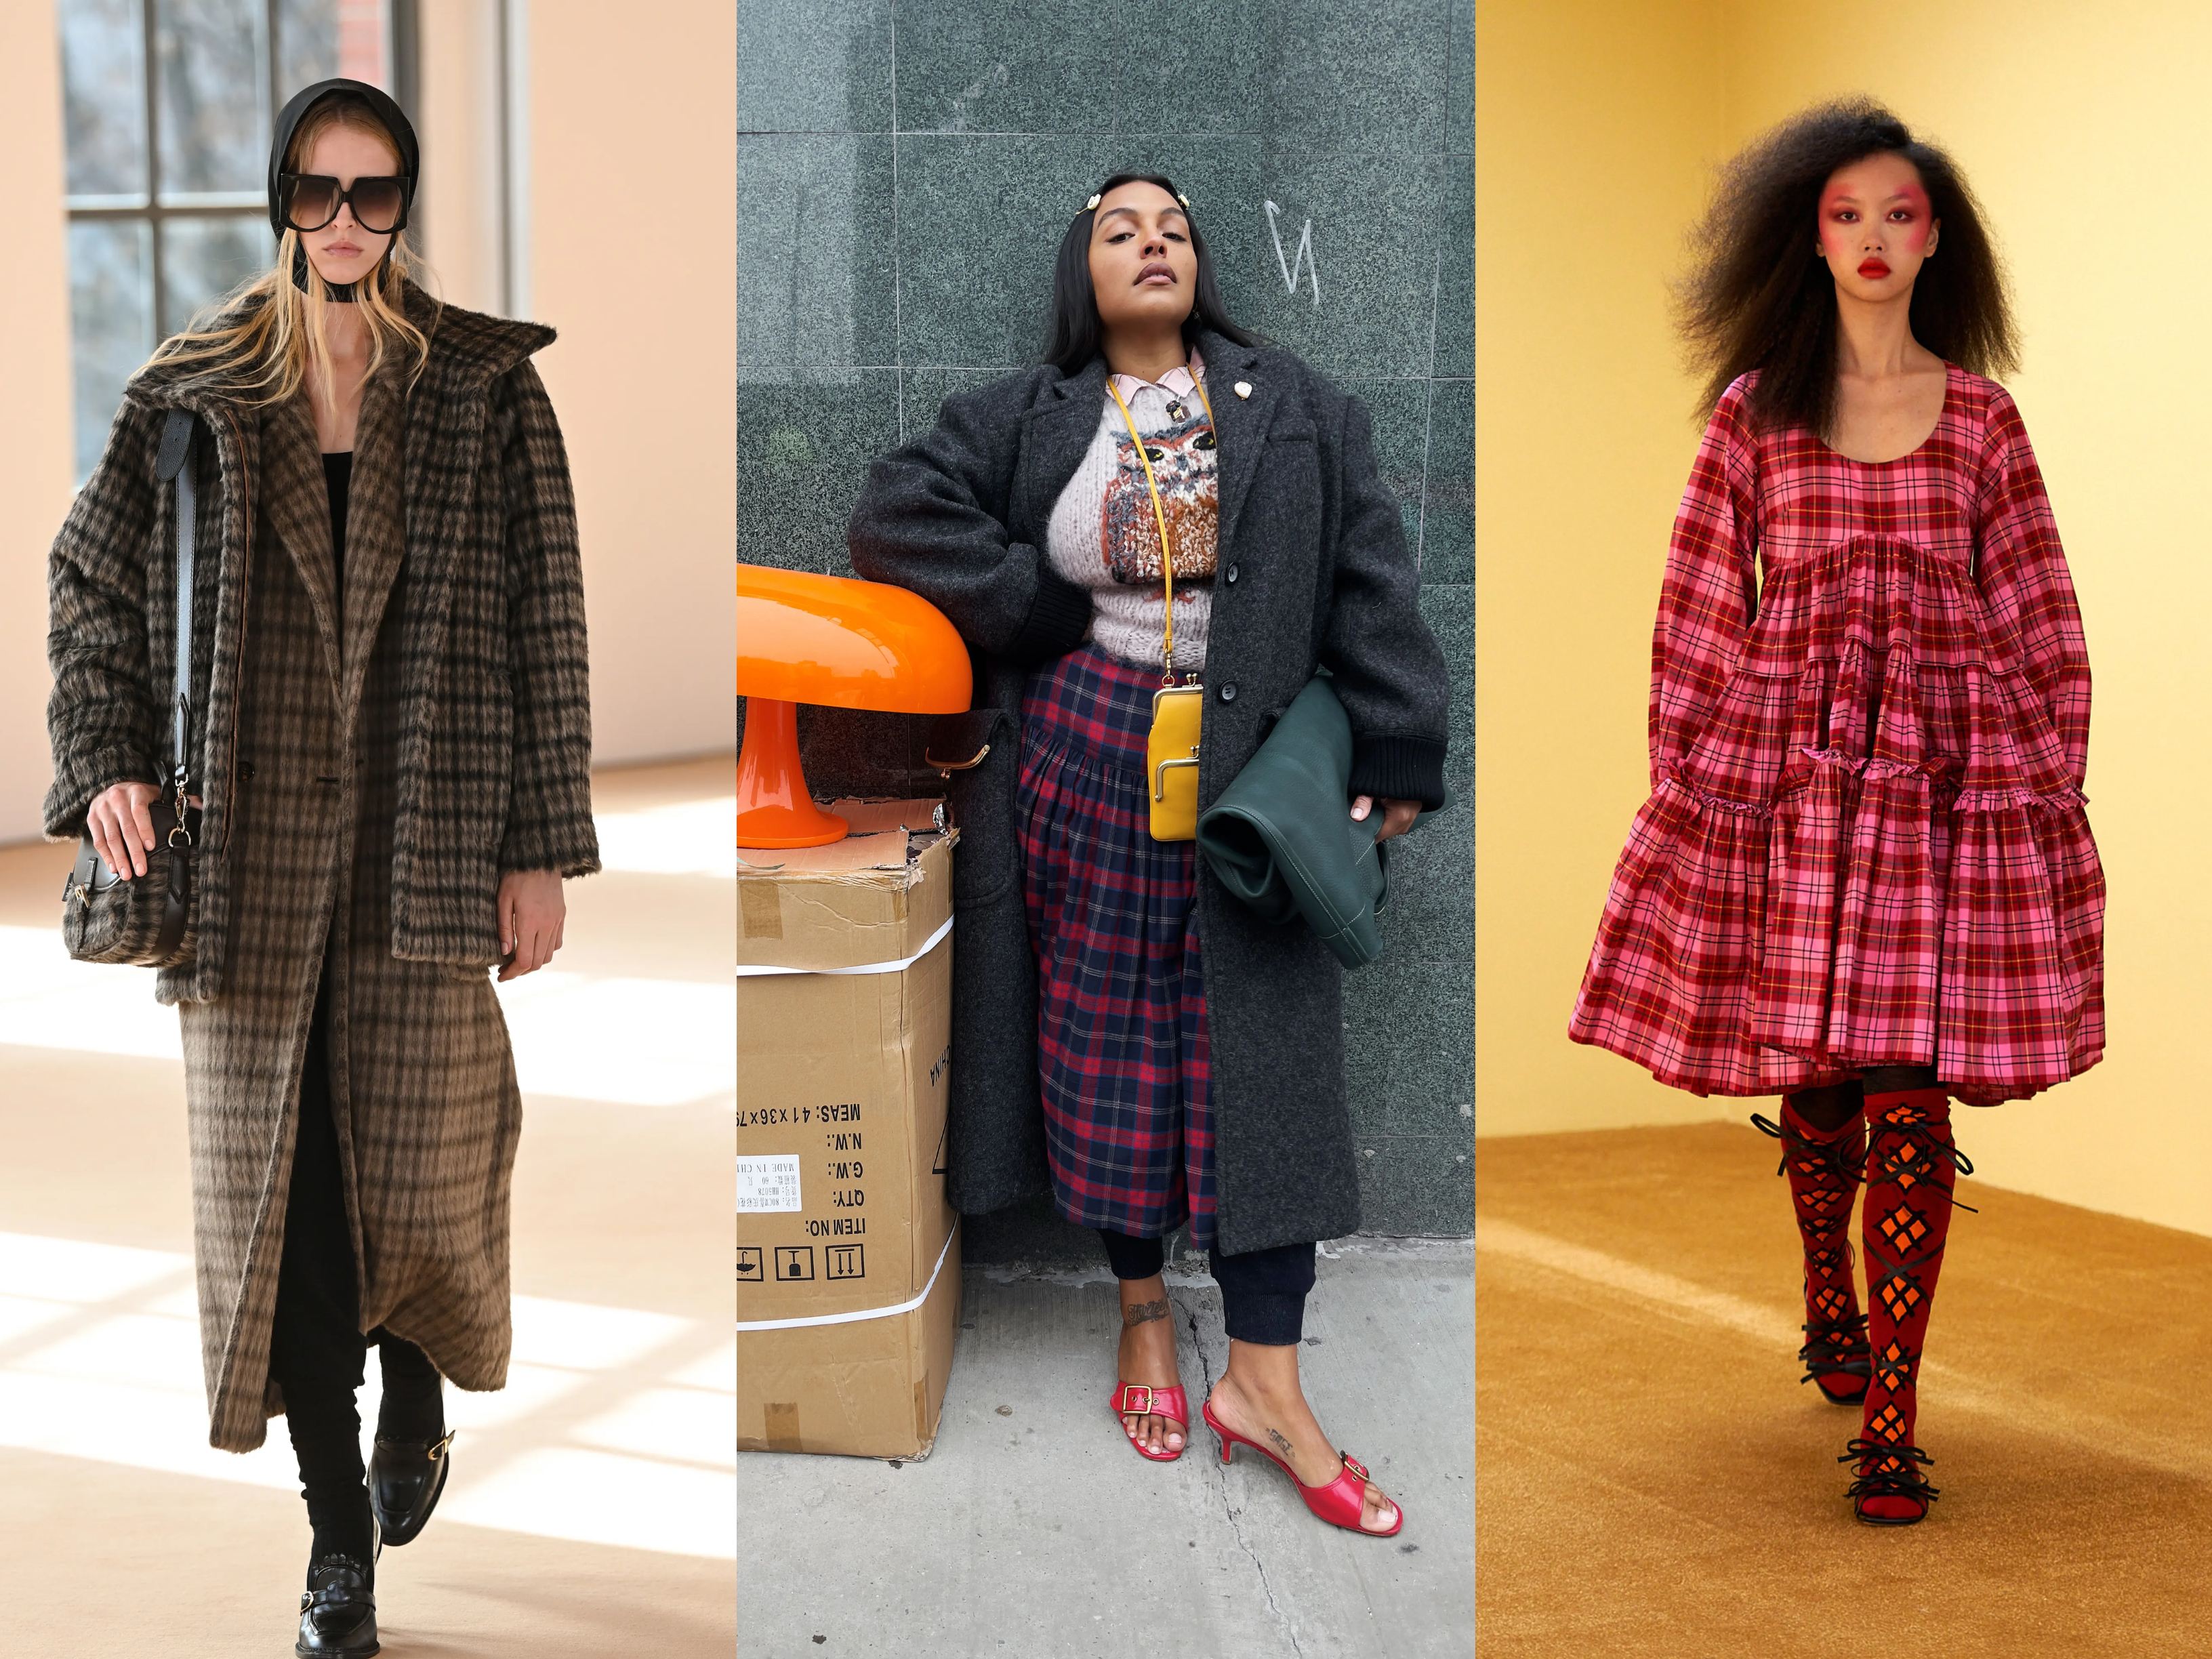 Models wearing AW21 trends Plaid 